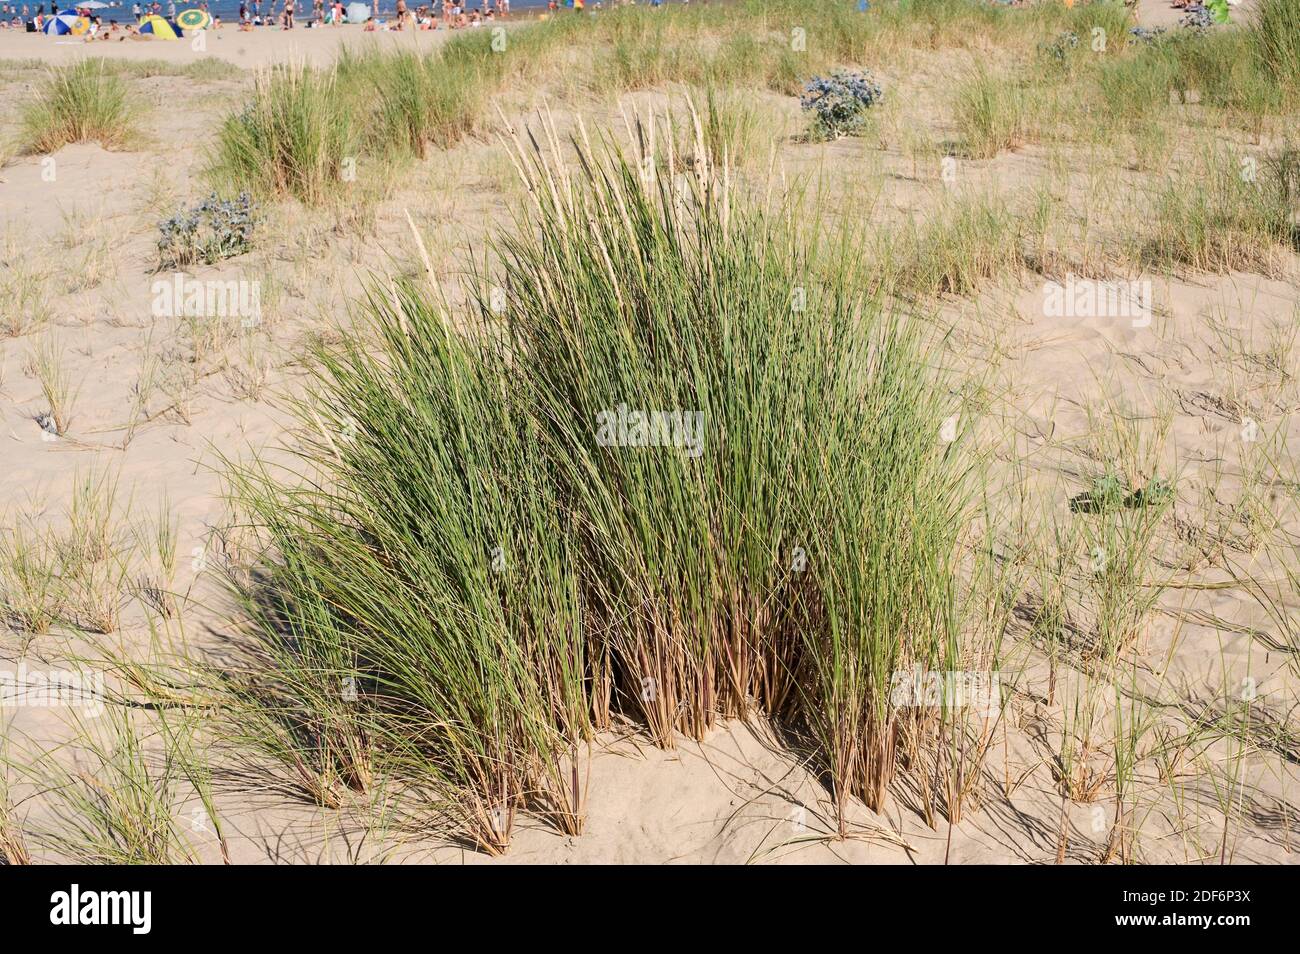 European beachgrass or European marram grass (Ammophila arenaria) is a perennial herb native to coastlines of Europe and north Africa. This photo was Stock Photo